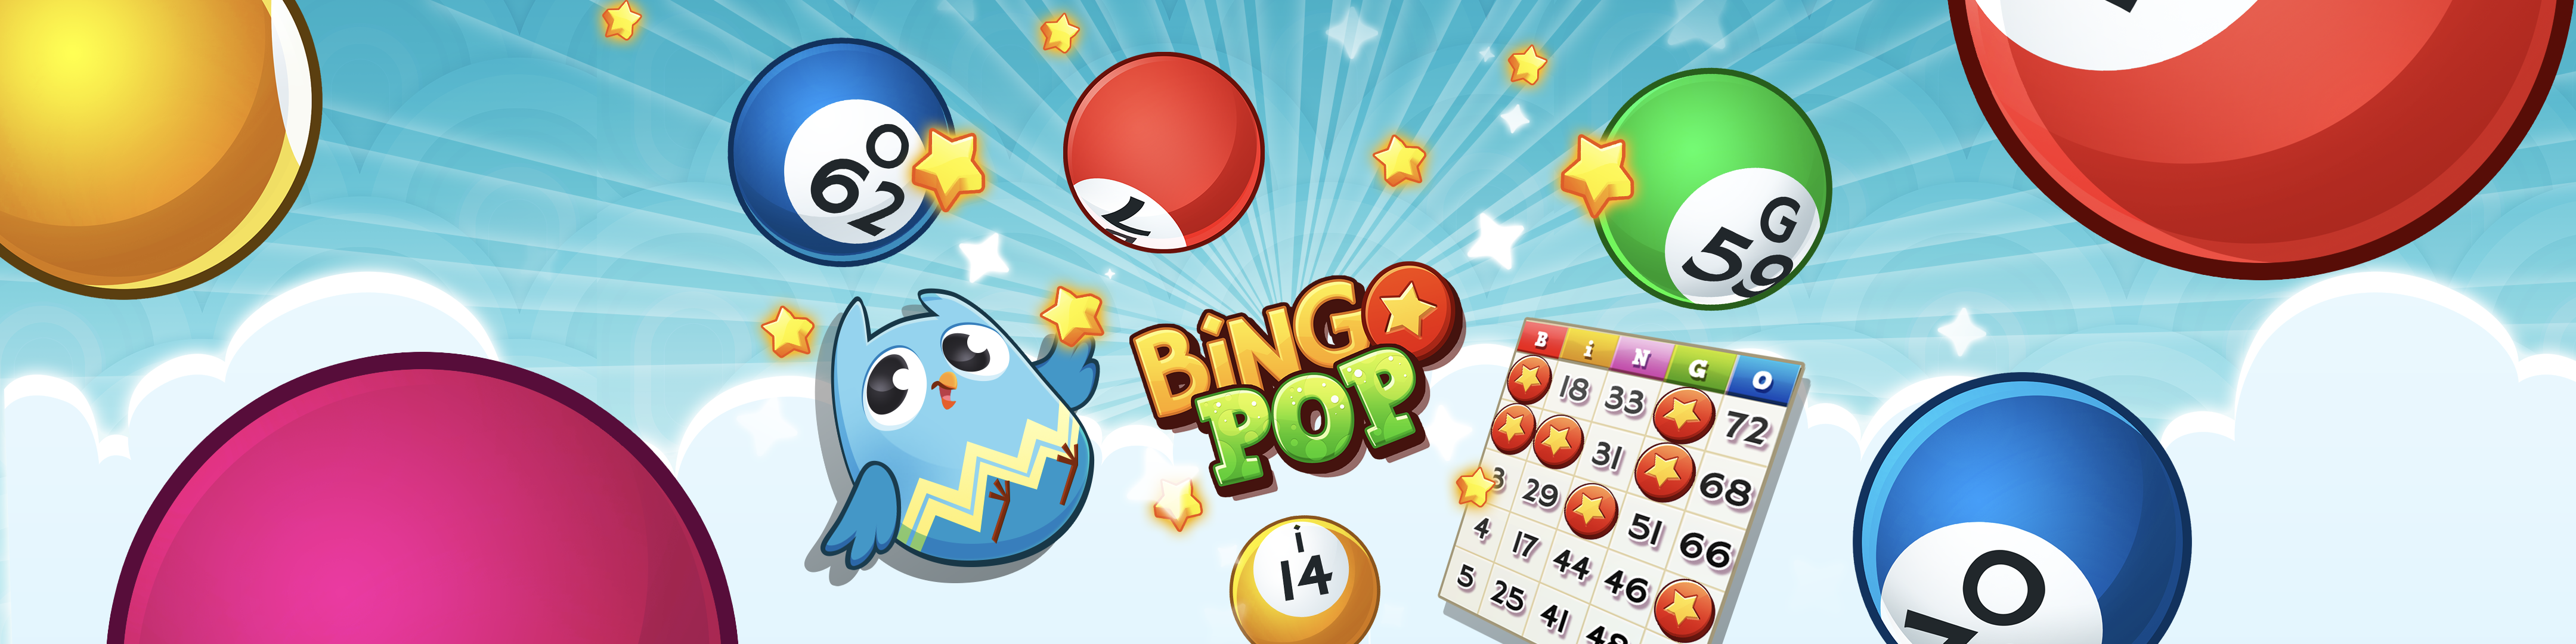 Bingo Pop Bingo Games Overview Apple App Store Us - 7 roblox facts you should know the leaderboard the